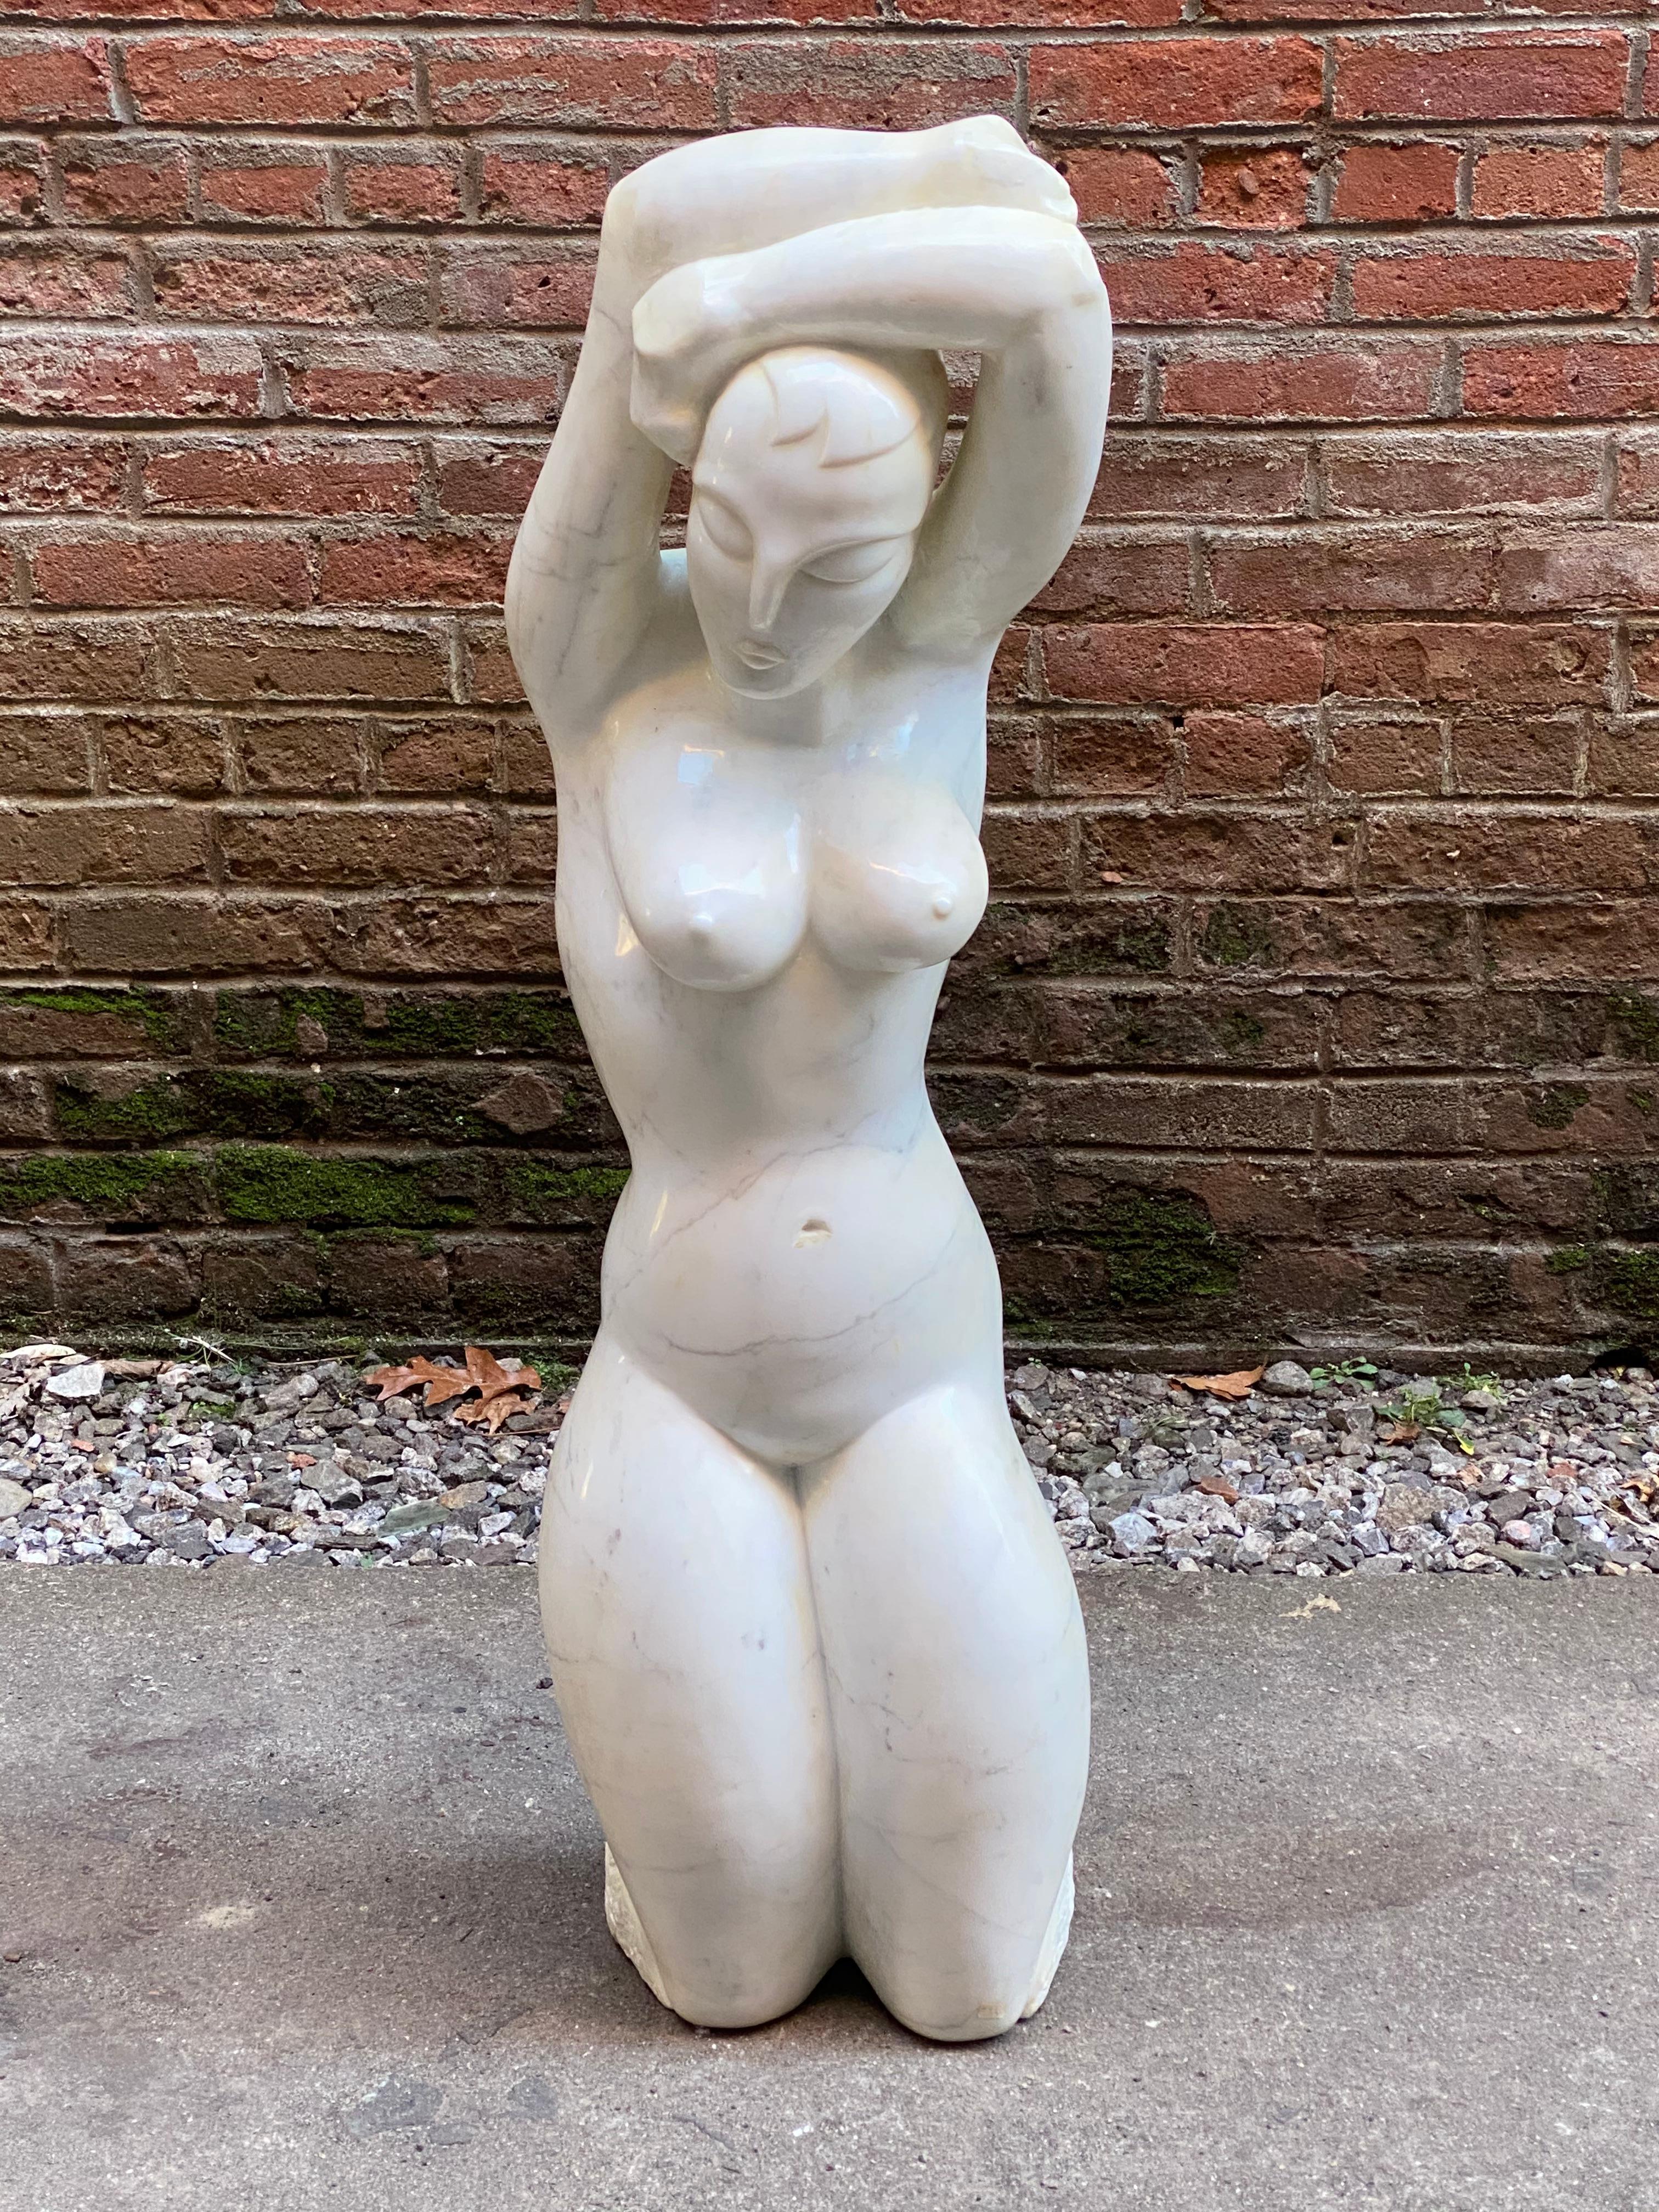 Sensual female nude Carrarra marble sculpture by Anthony Gennarelli. An homage to Amadeo Modigliani, circa 1980-1985. The artist has depicted this curvaceous figure with arms raised in a very natural counter poised standing position. Truncated at